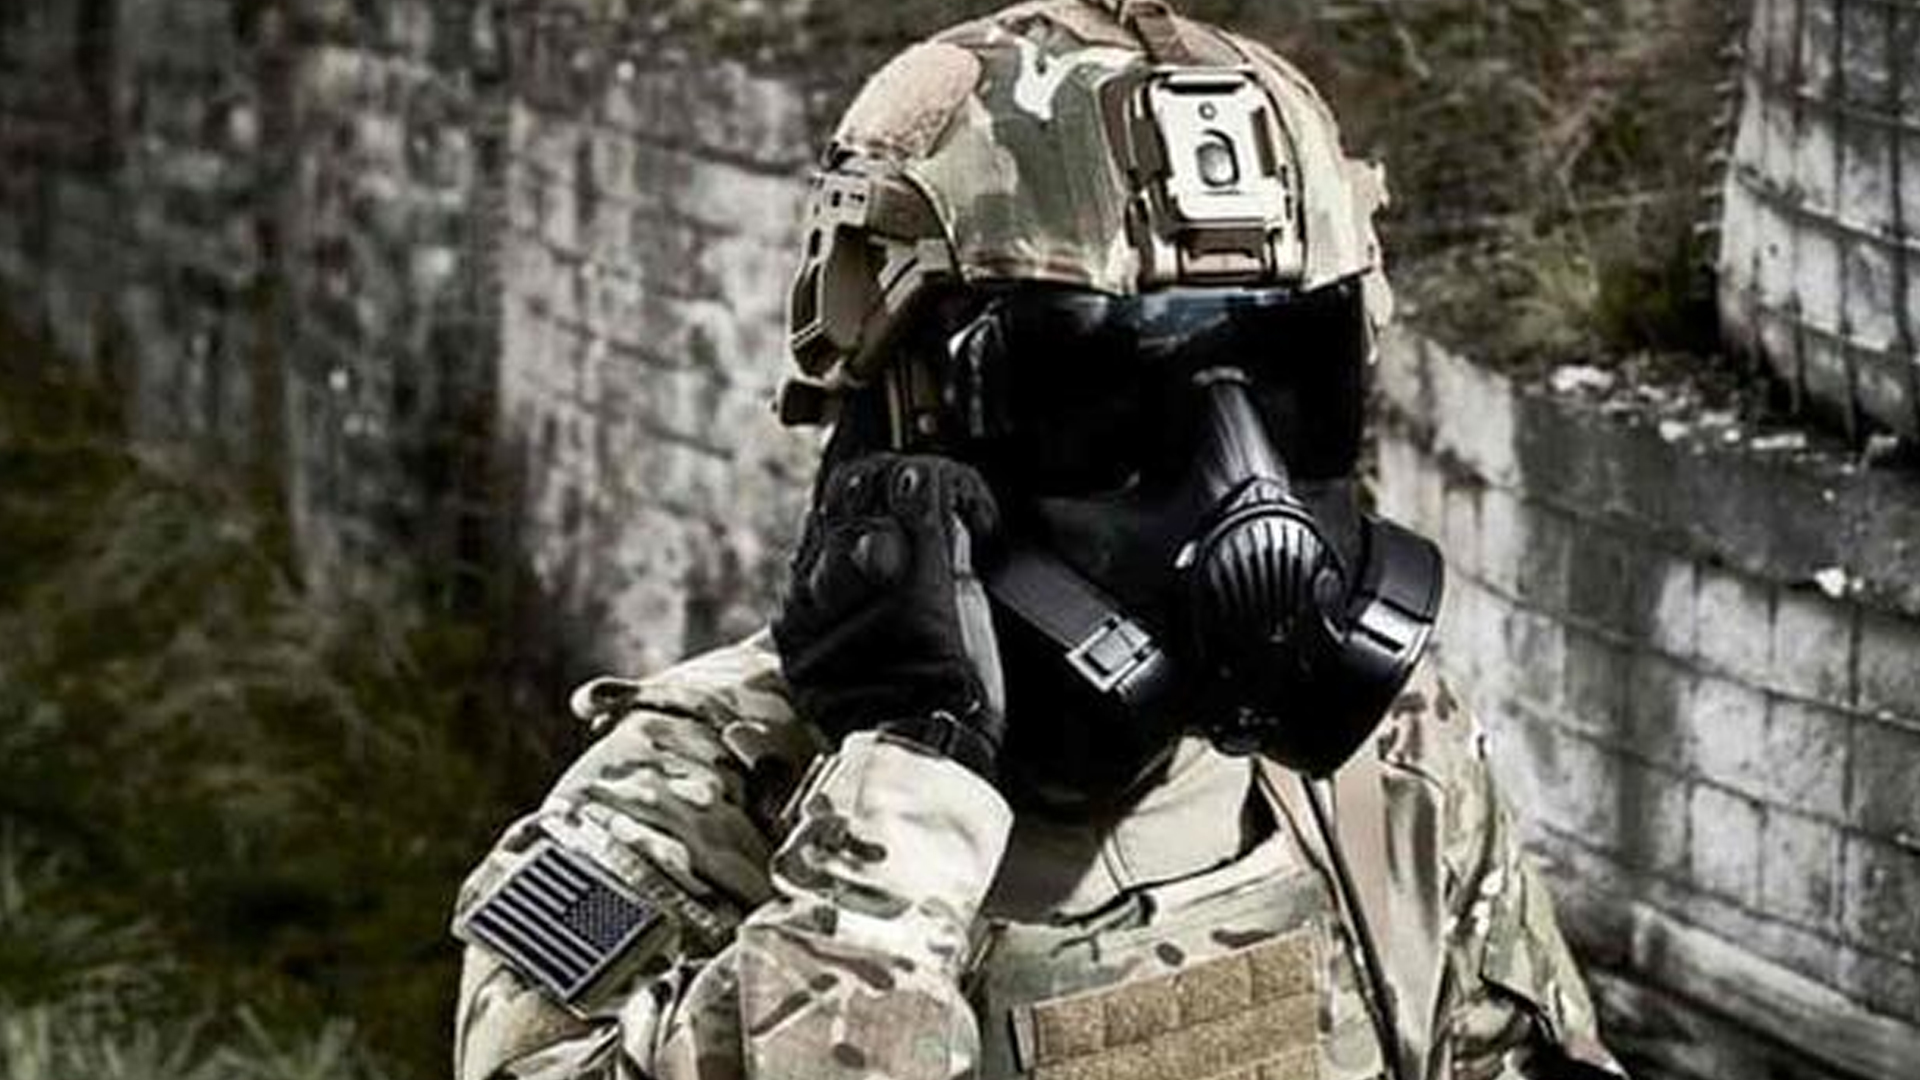 Army Rolls Out Lightweight, High-Protection Next-Gen Helmets to 82nd Airborne Soldiers...